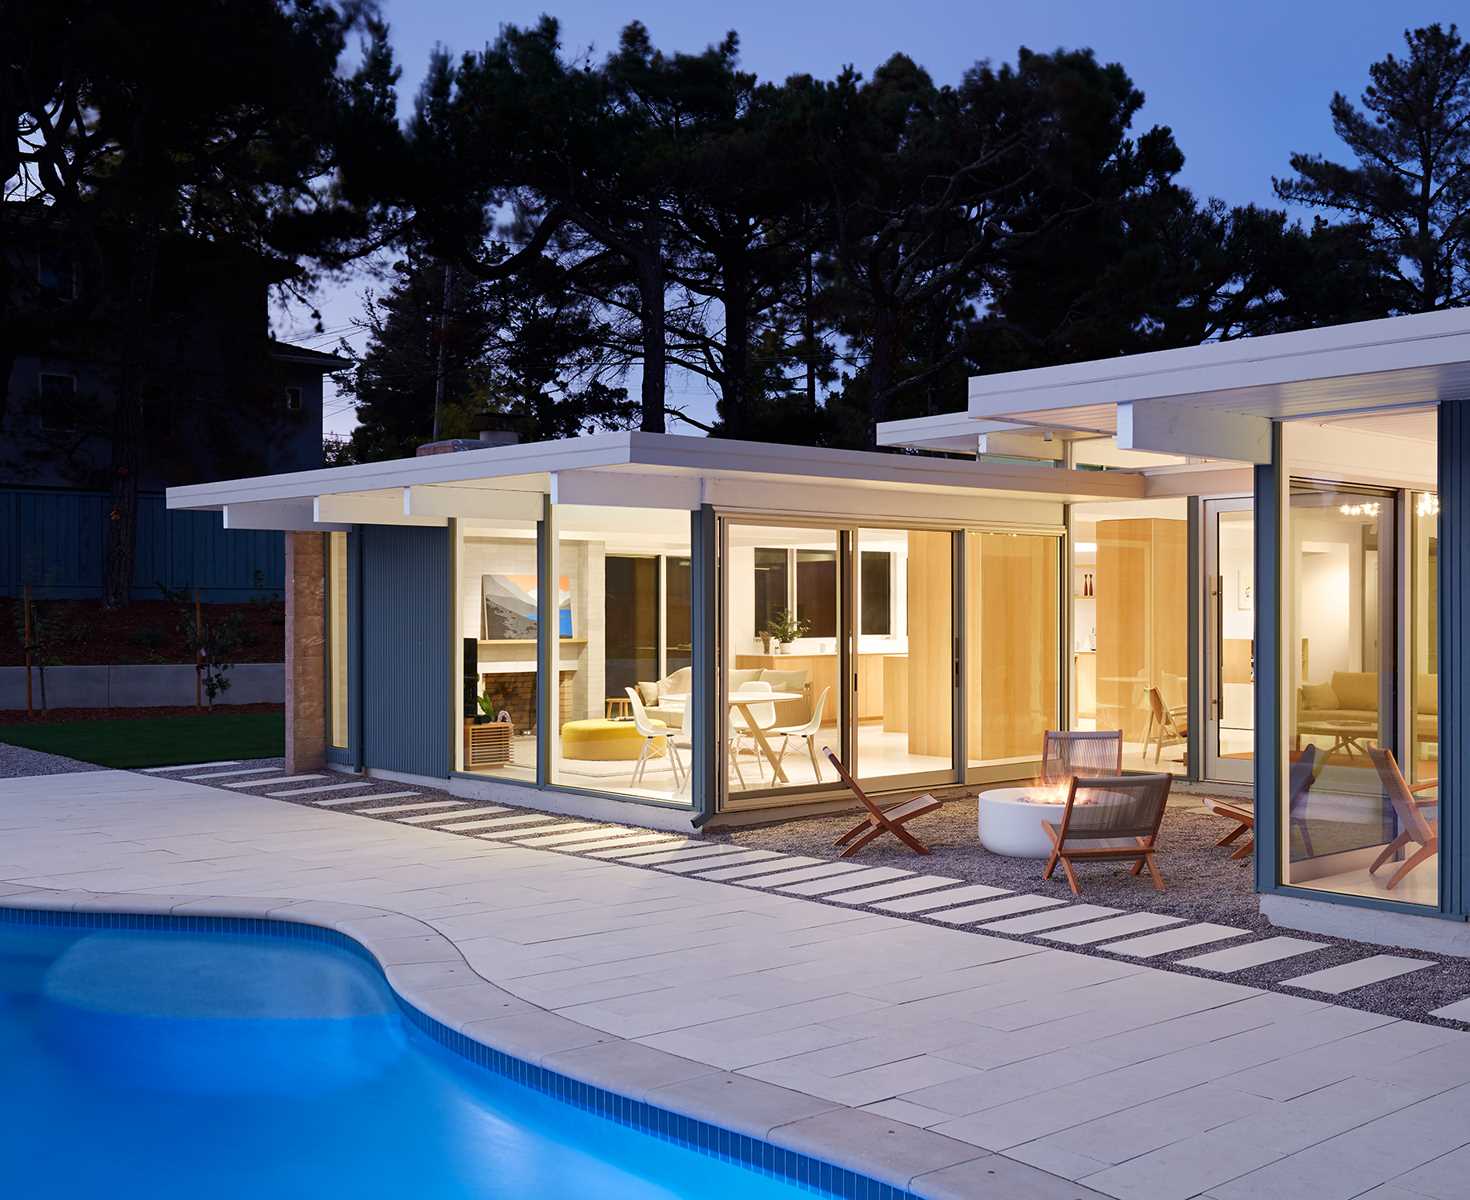 A remodeled Eichler home with a swimming pool.